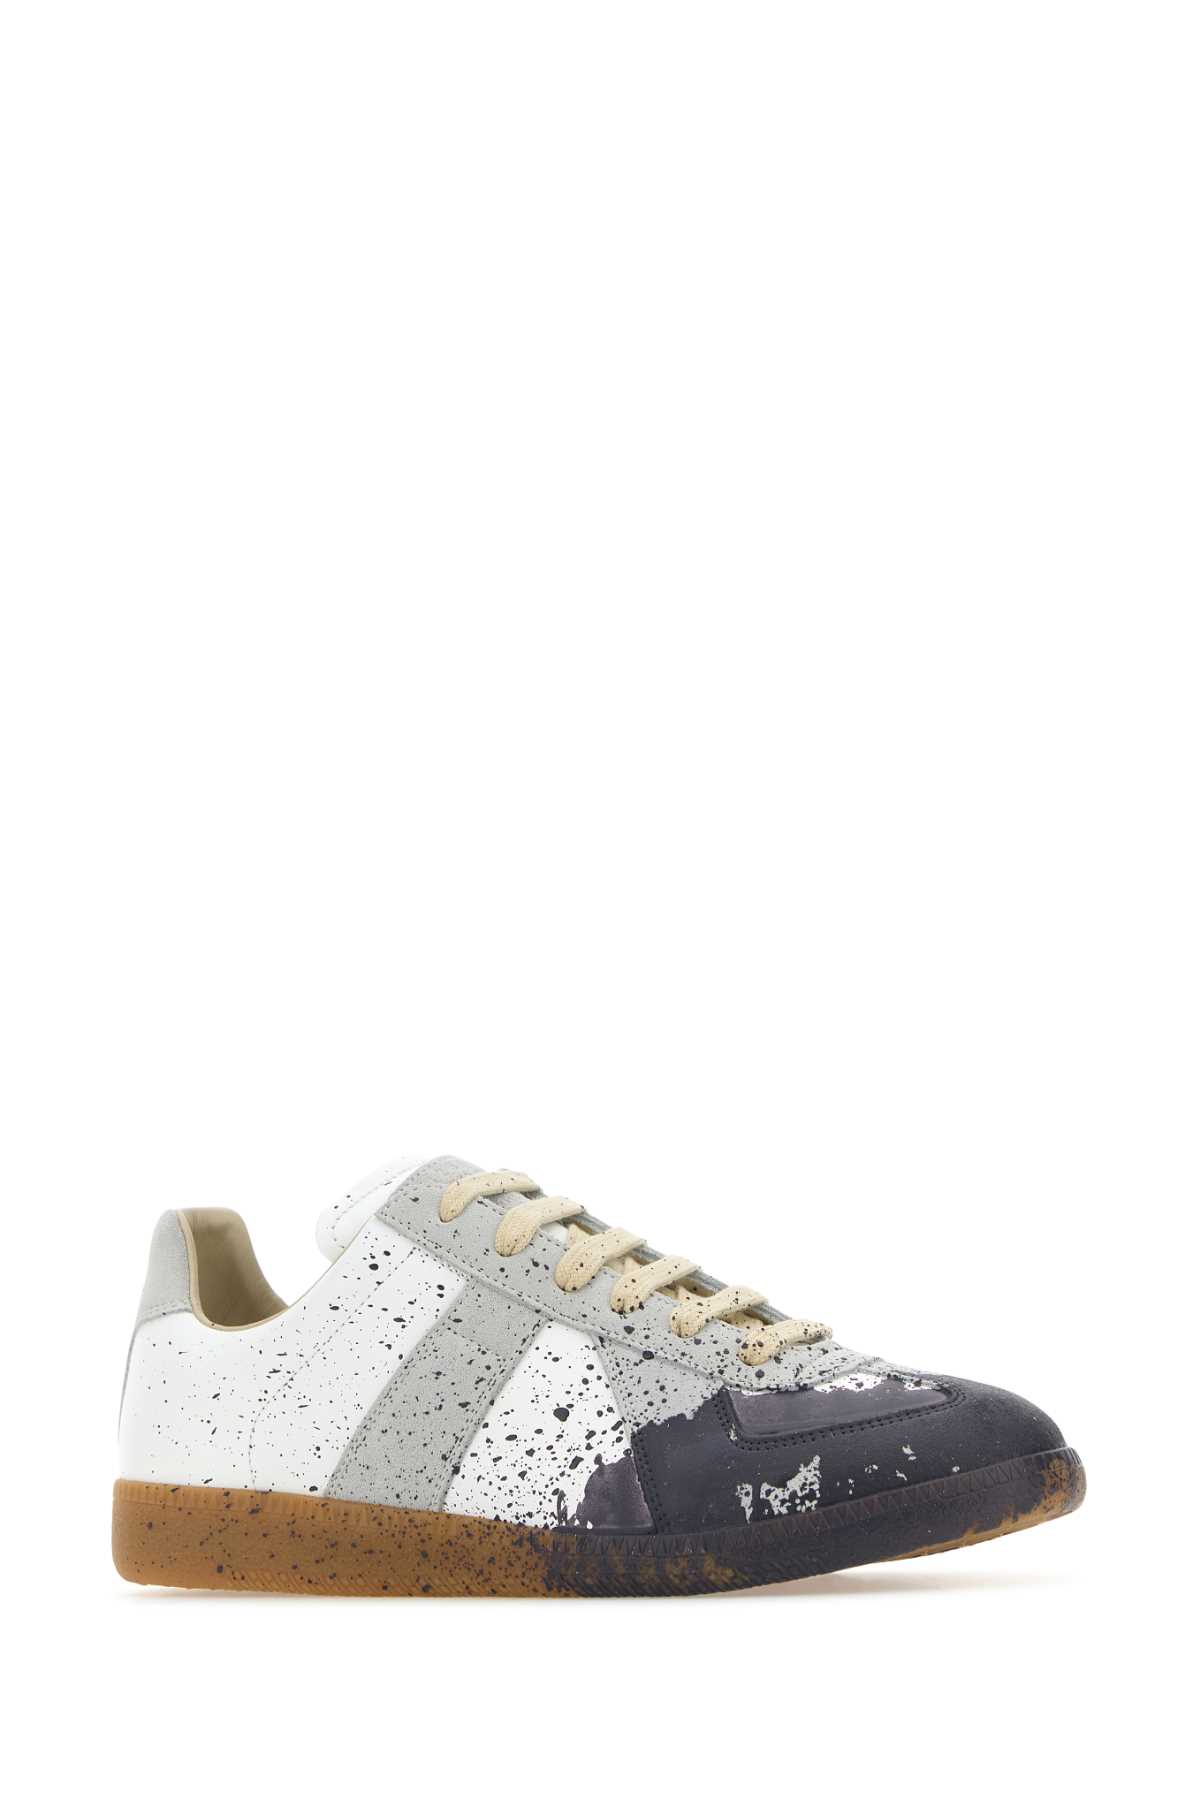 Maison Margiela Multicolor Leather Replica Trainers In Whitepewter